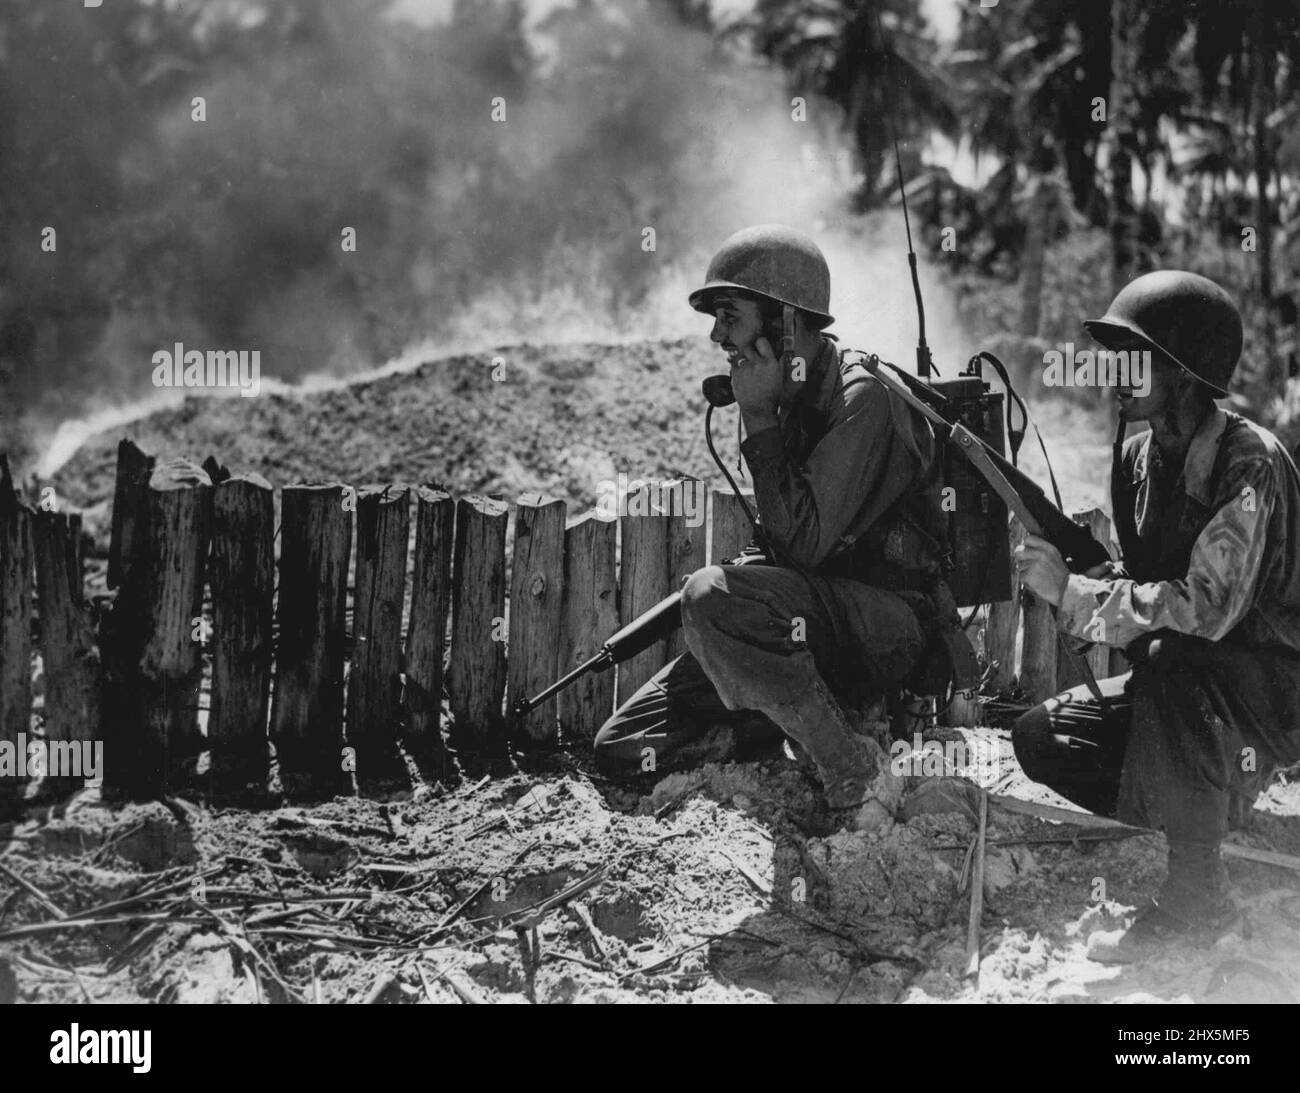 Sgt. O. De Giraloms, Ohio left and Private R. B. Cox, Washington D.C. right immediately contact the second landing party after reaching the beach at Morotai. Note the Japanese dump blazing in the background. September 23, 1944. Stock Photo